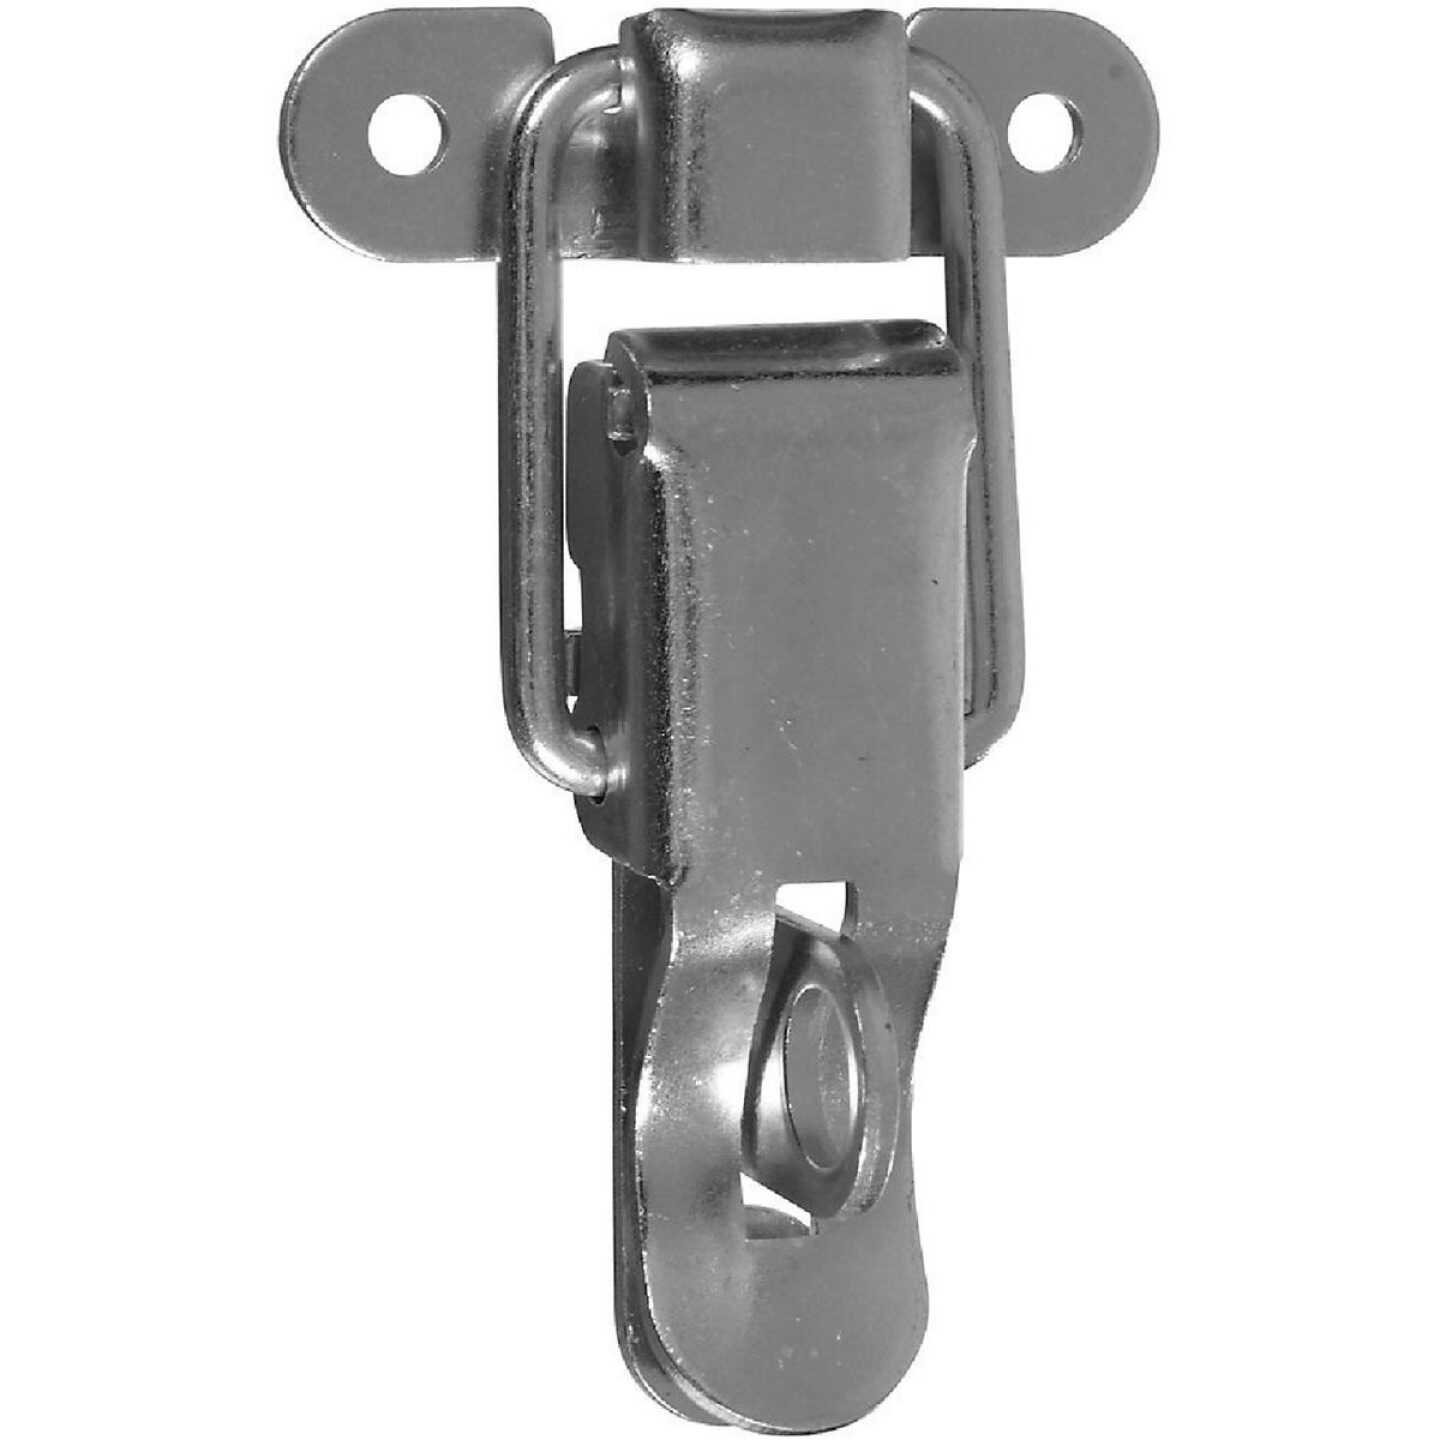 National Zinc-Plated Finish Lockable Draw Catch (2-Count) Image 1